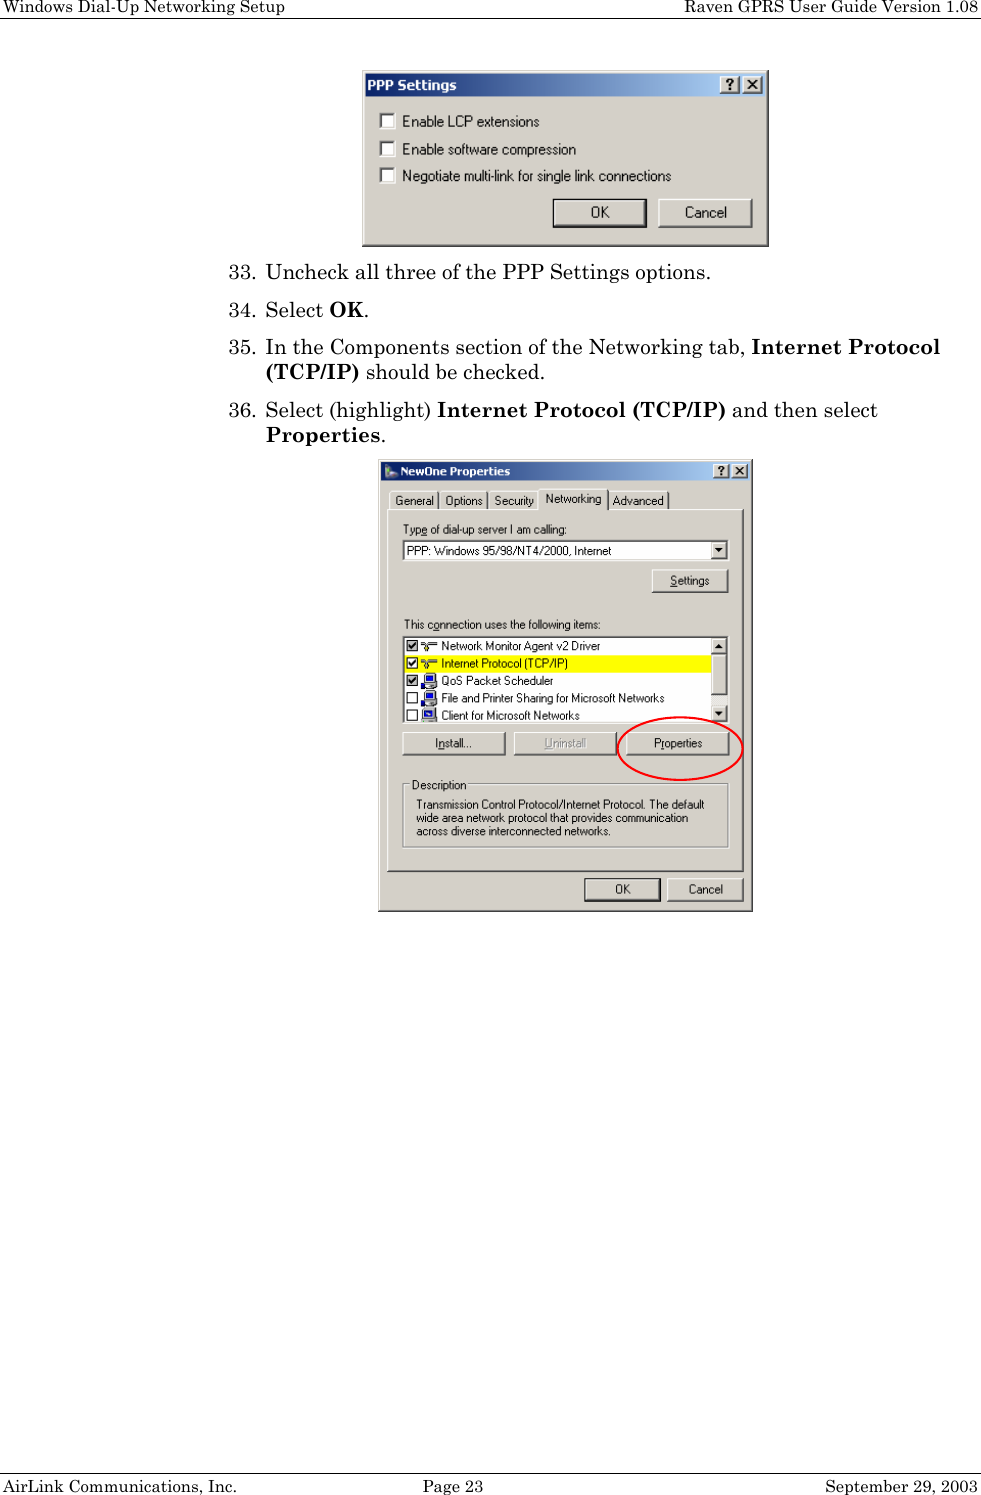 Windows Dial-Up Networking Setup    Raven GPRS User Guide Version 1.08 AirLink Communications, Inc.  Page 23  September 29, 2003  33. Uncheck all three of the PPP Settings options. 34. Select OK. 35. In the Components section of the Networking tab, Internet Protocol (TCP/IP) should be checked. 36. Select (highlight) Internet Protocol (TCP/IP) and then select Properties.   